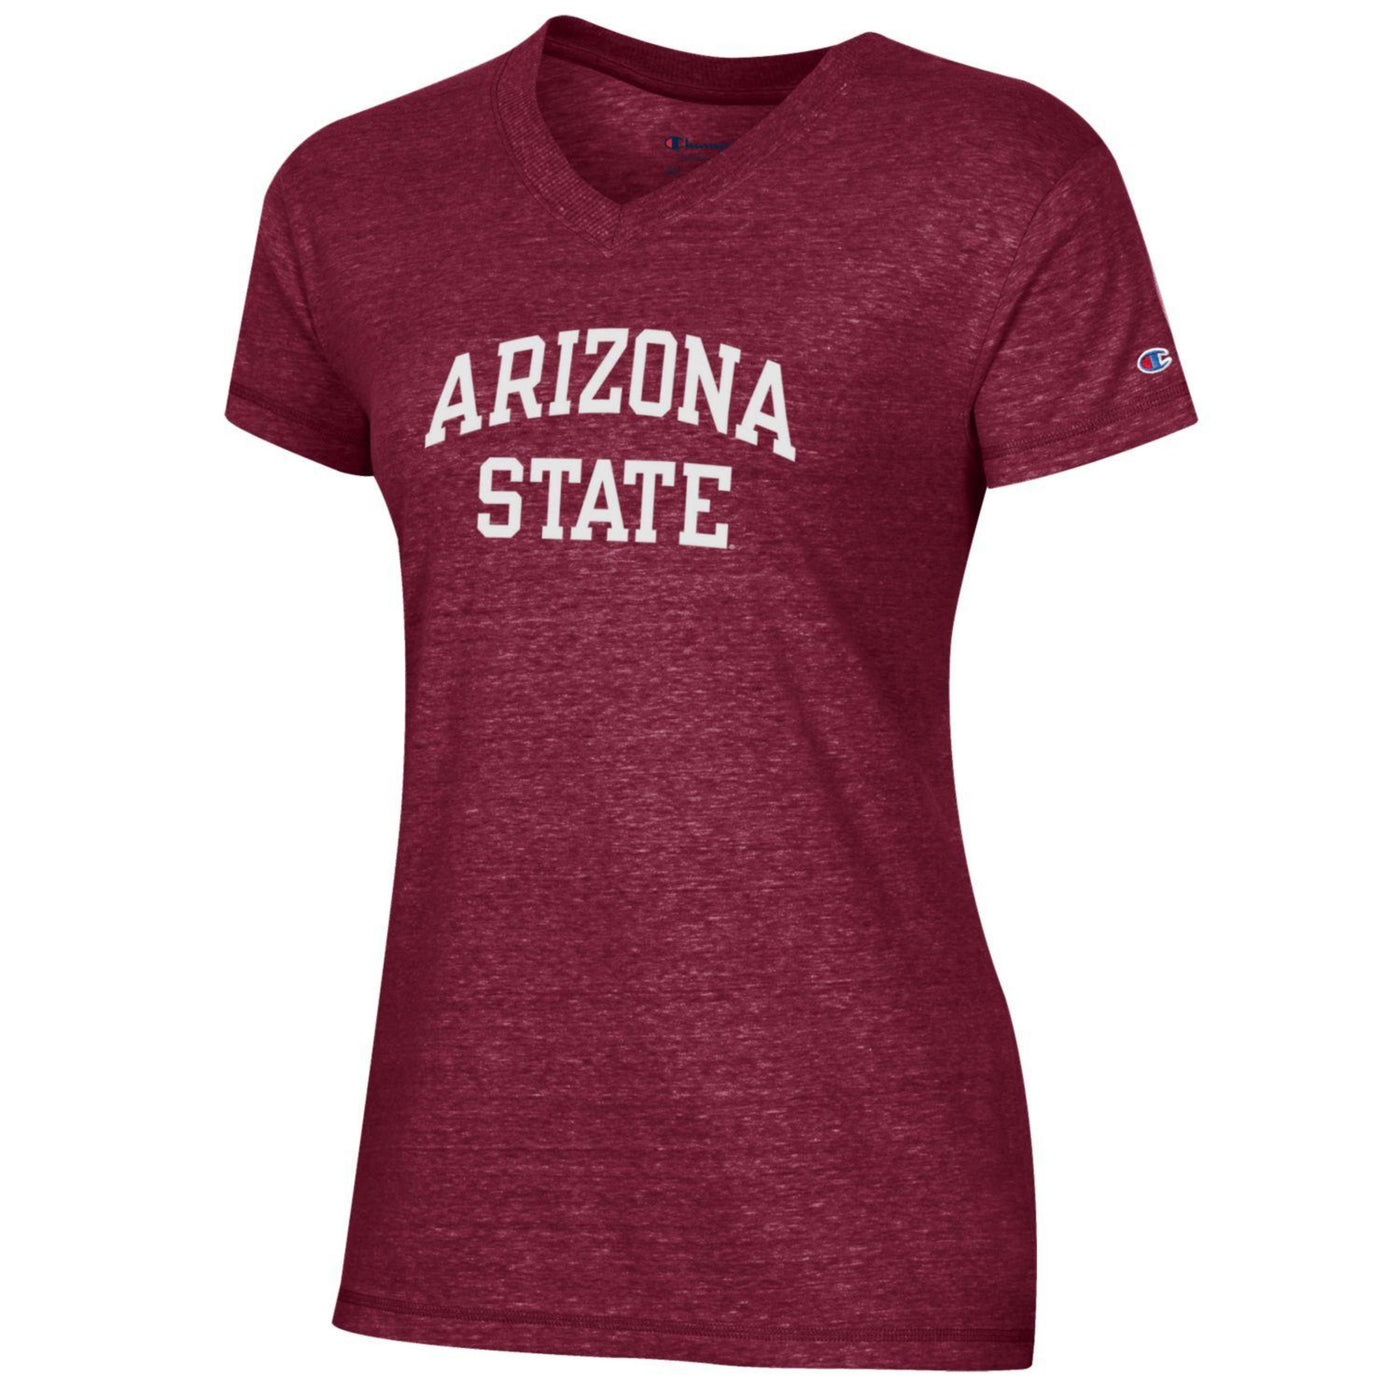 ASU women's maroon v-neck shirt with the text 